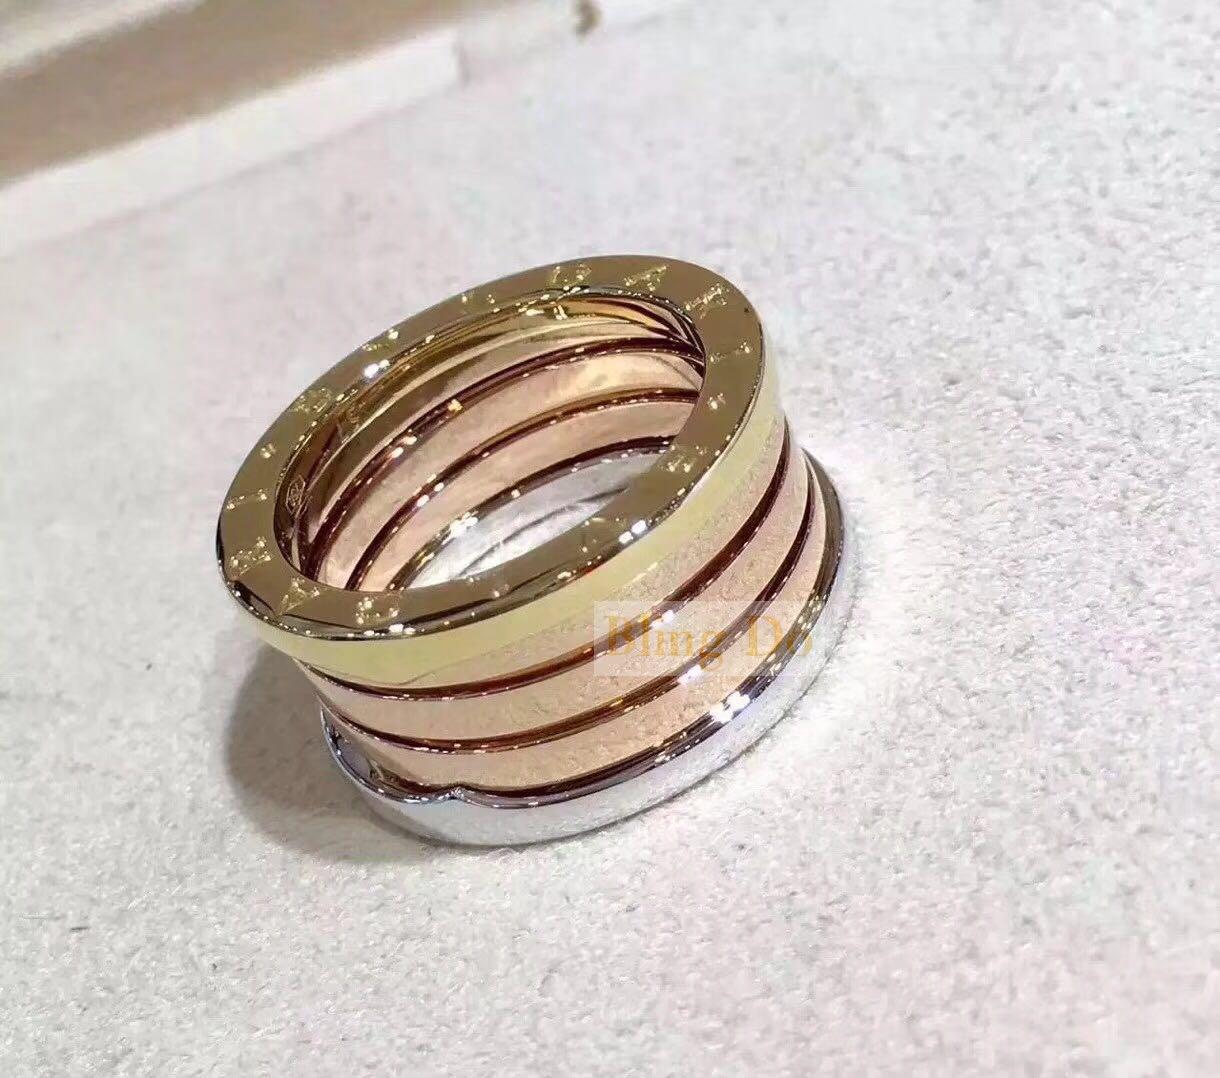 Classic Style Bvlgari B Zero1 Ring In 18 Kt Rose And White Gold Design Your Own Real 18k Gold And Gia Diamond Luxury Brand Jewelry Custom Made